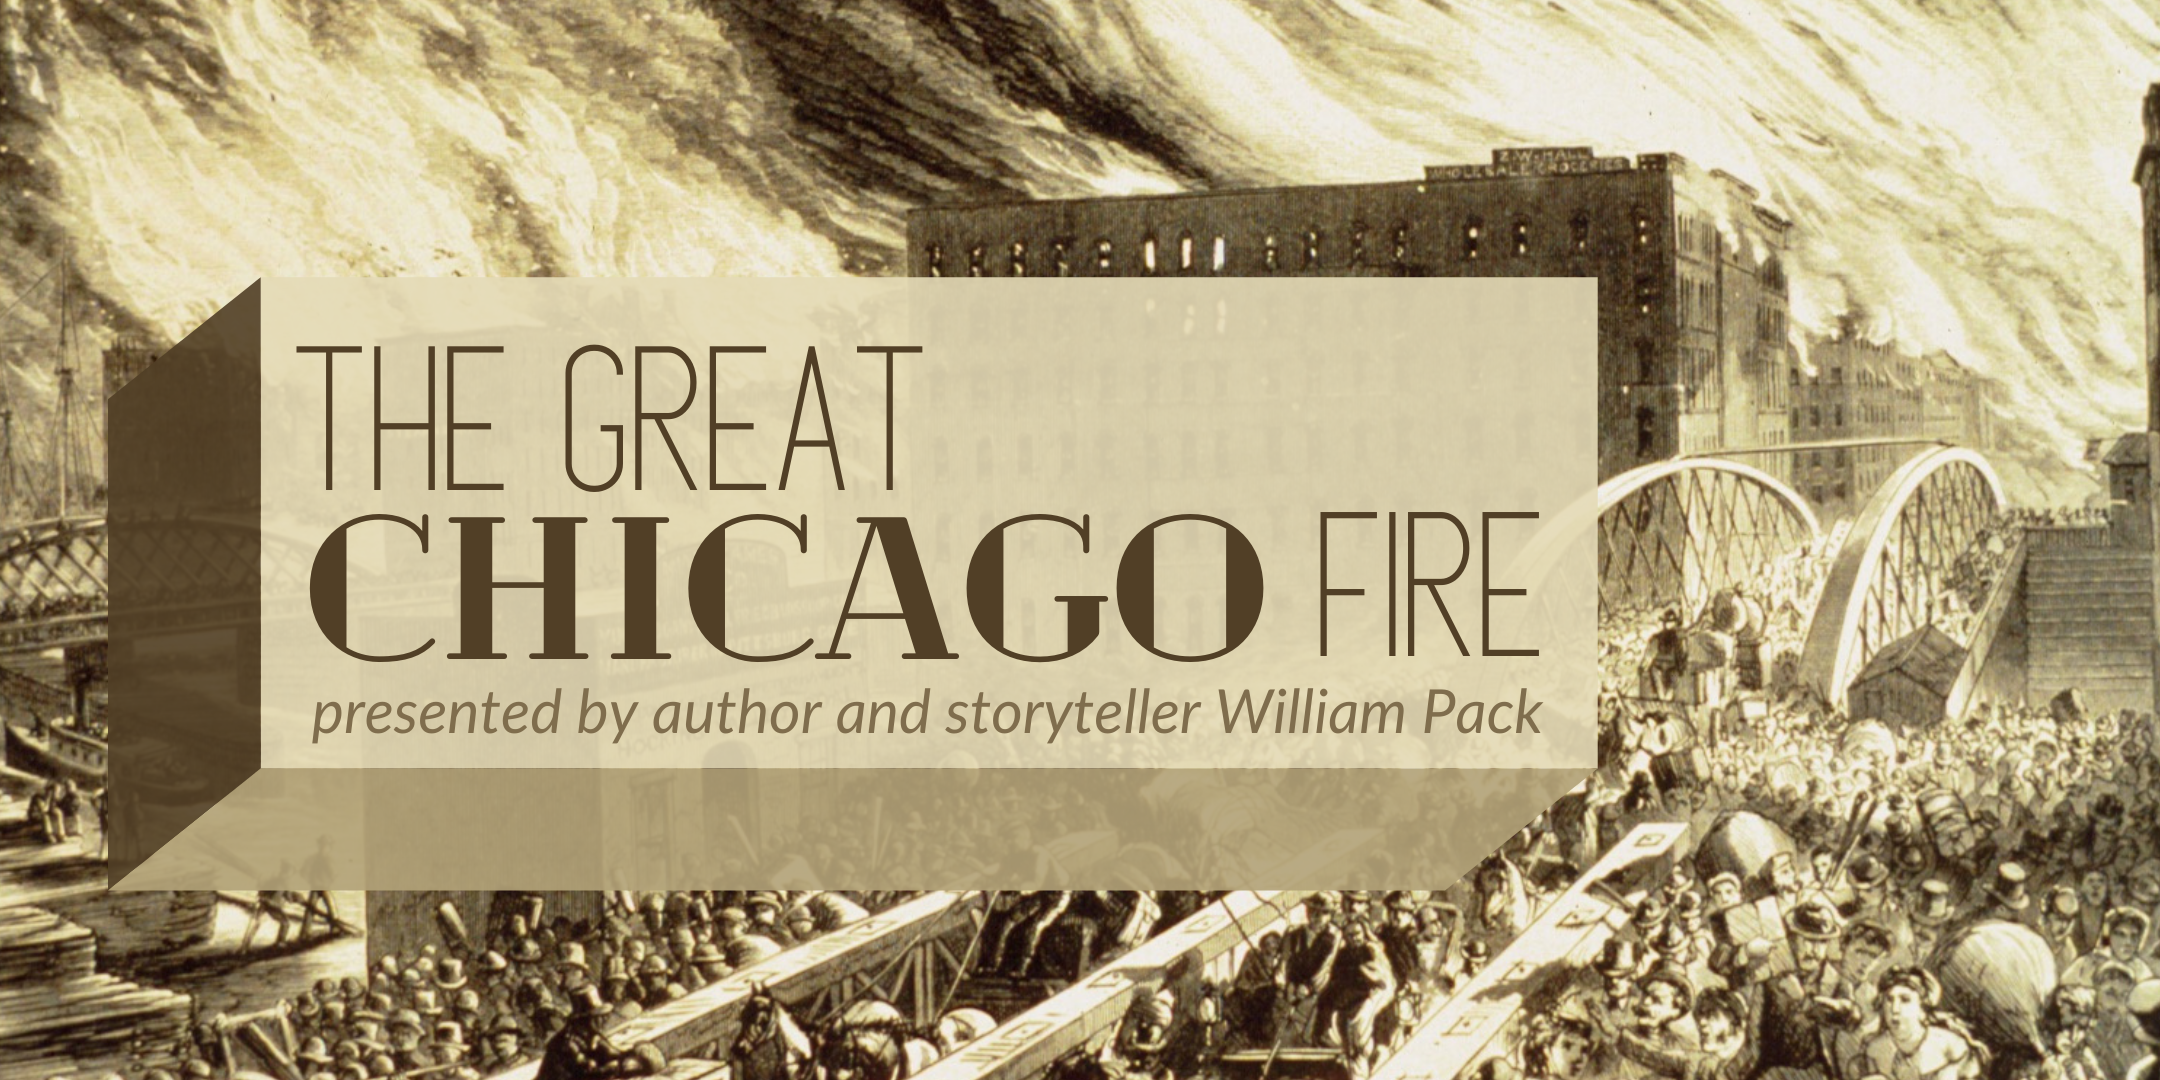 The Great Chicago Fire with author and storyteller William Pack